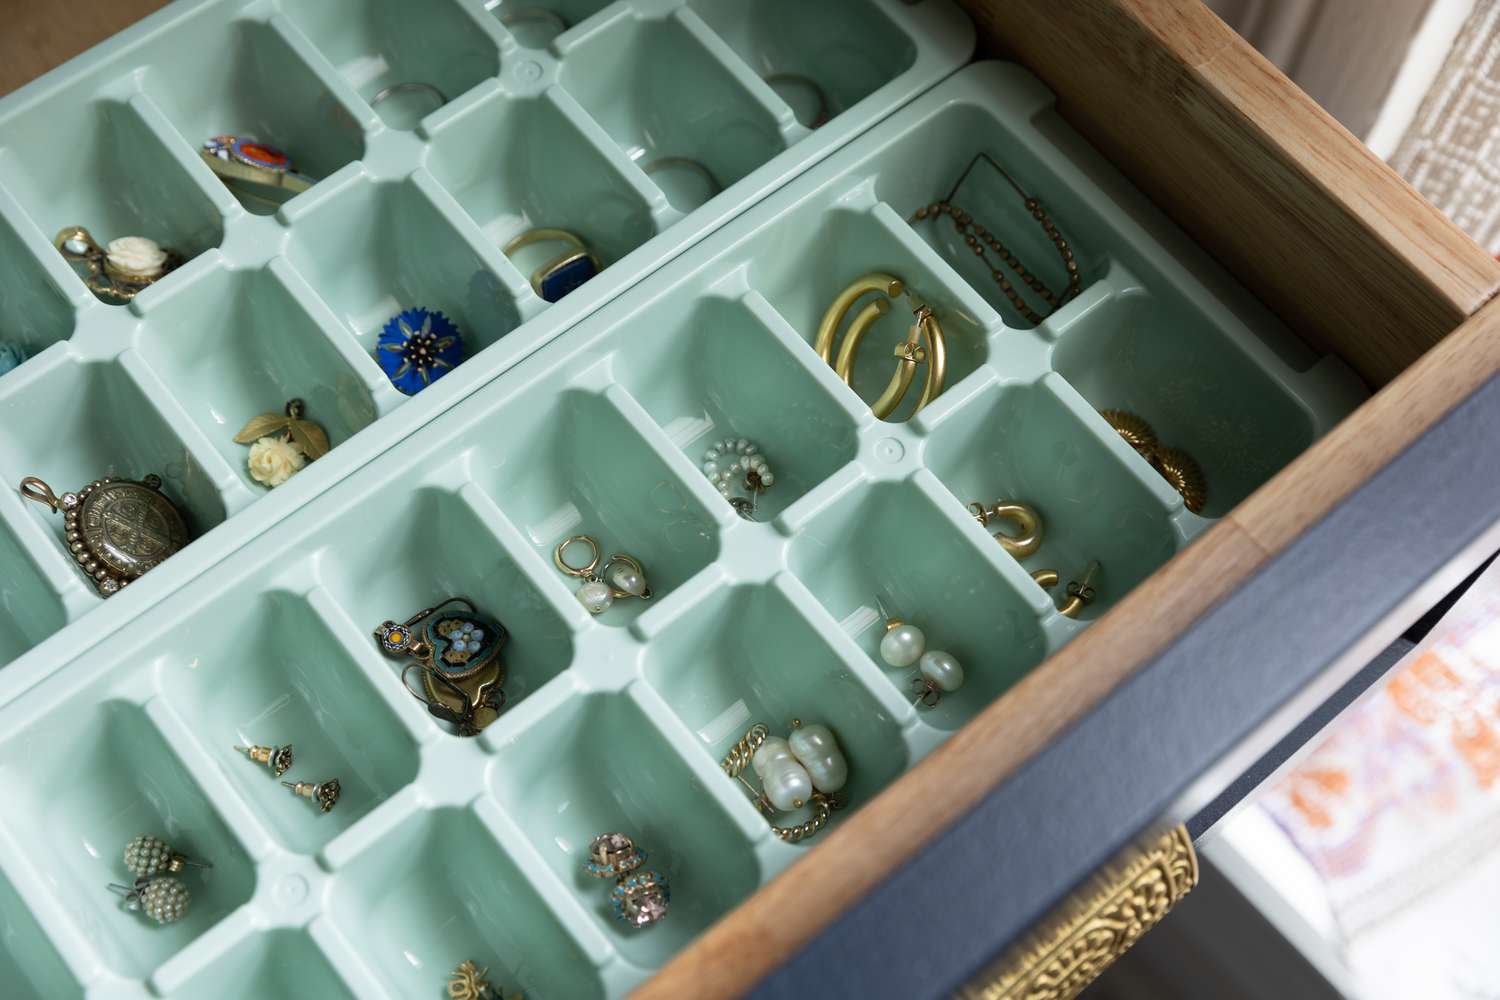 How To Store Earrings In A Drawer